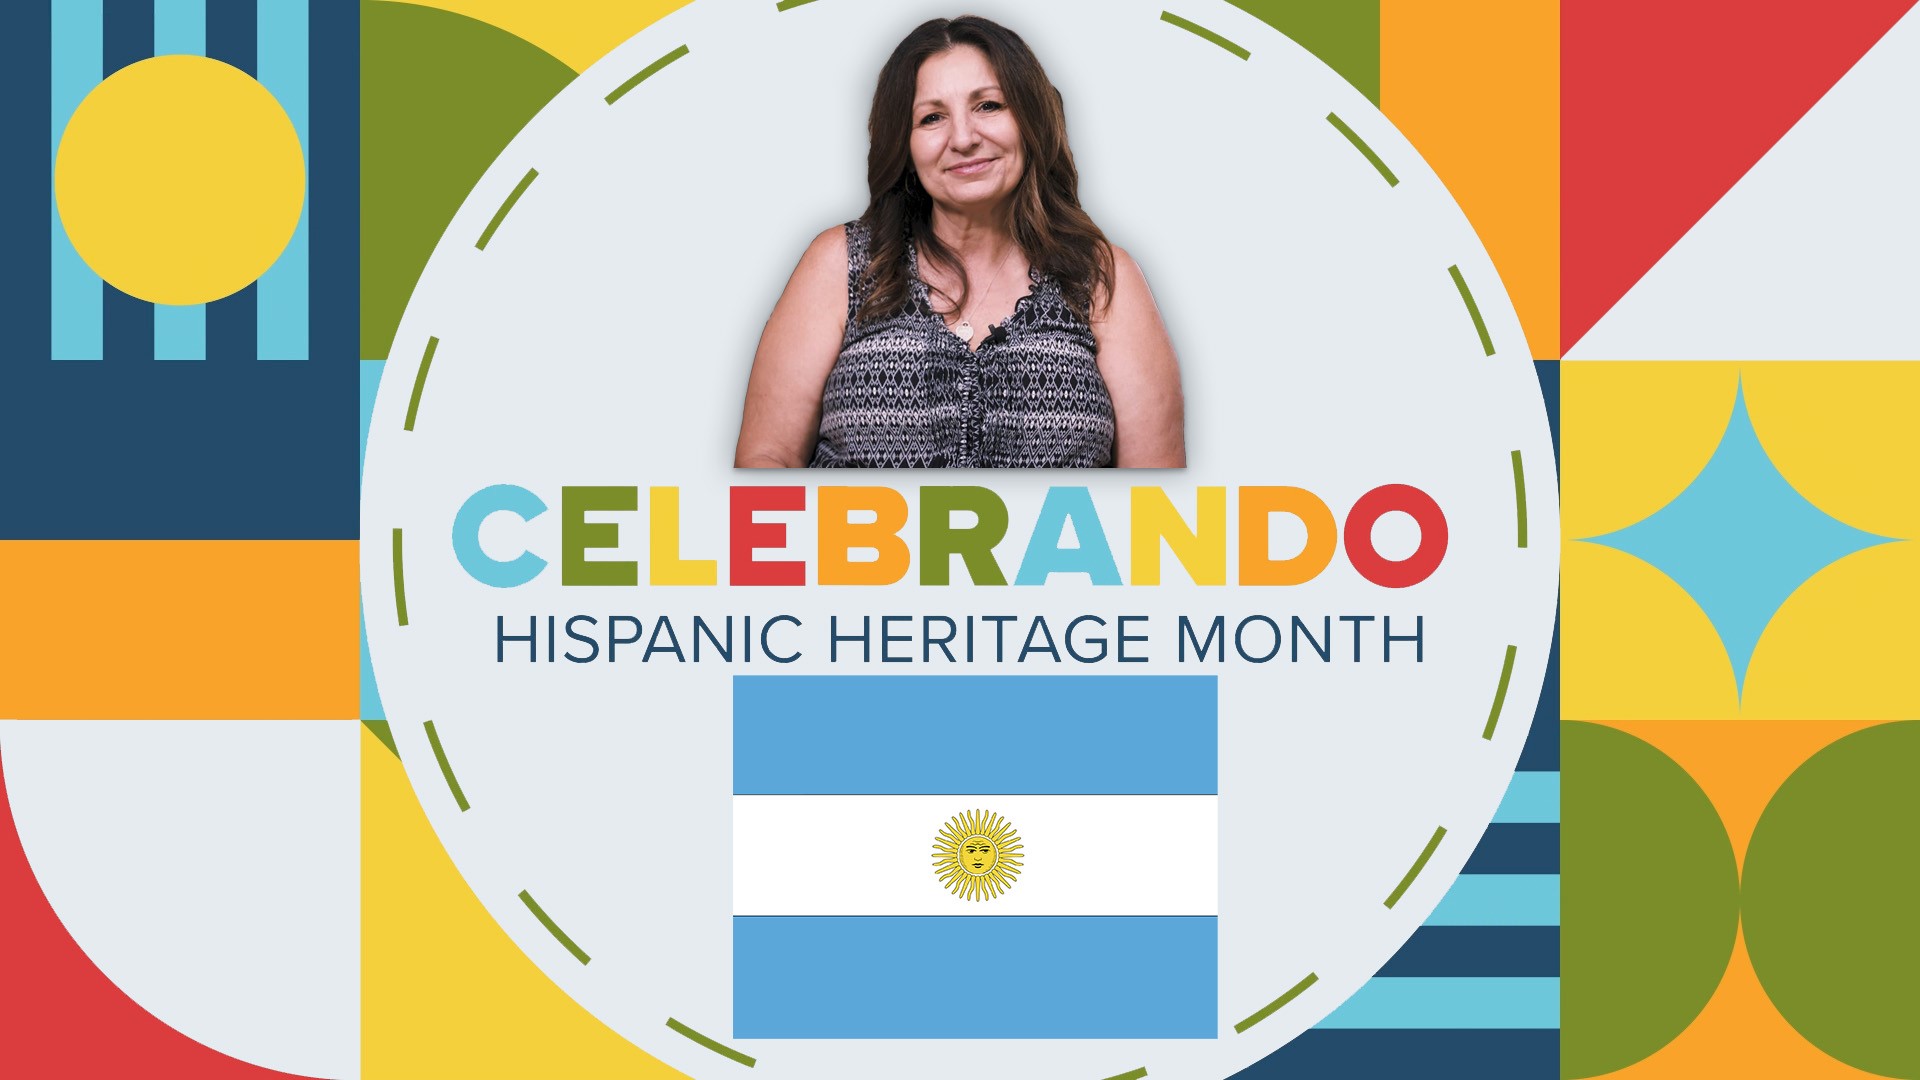 Graciela Ascarrunz is from Buenos Aires, Argentina. She is proud to be Hispanic and part of a culture that is family-oriented.